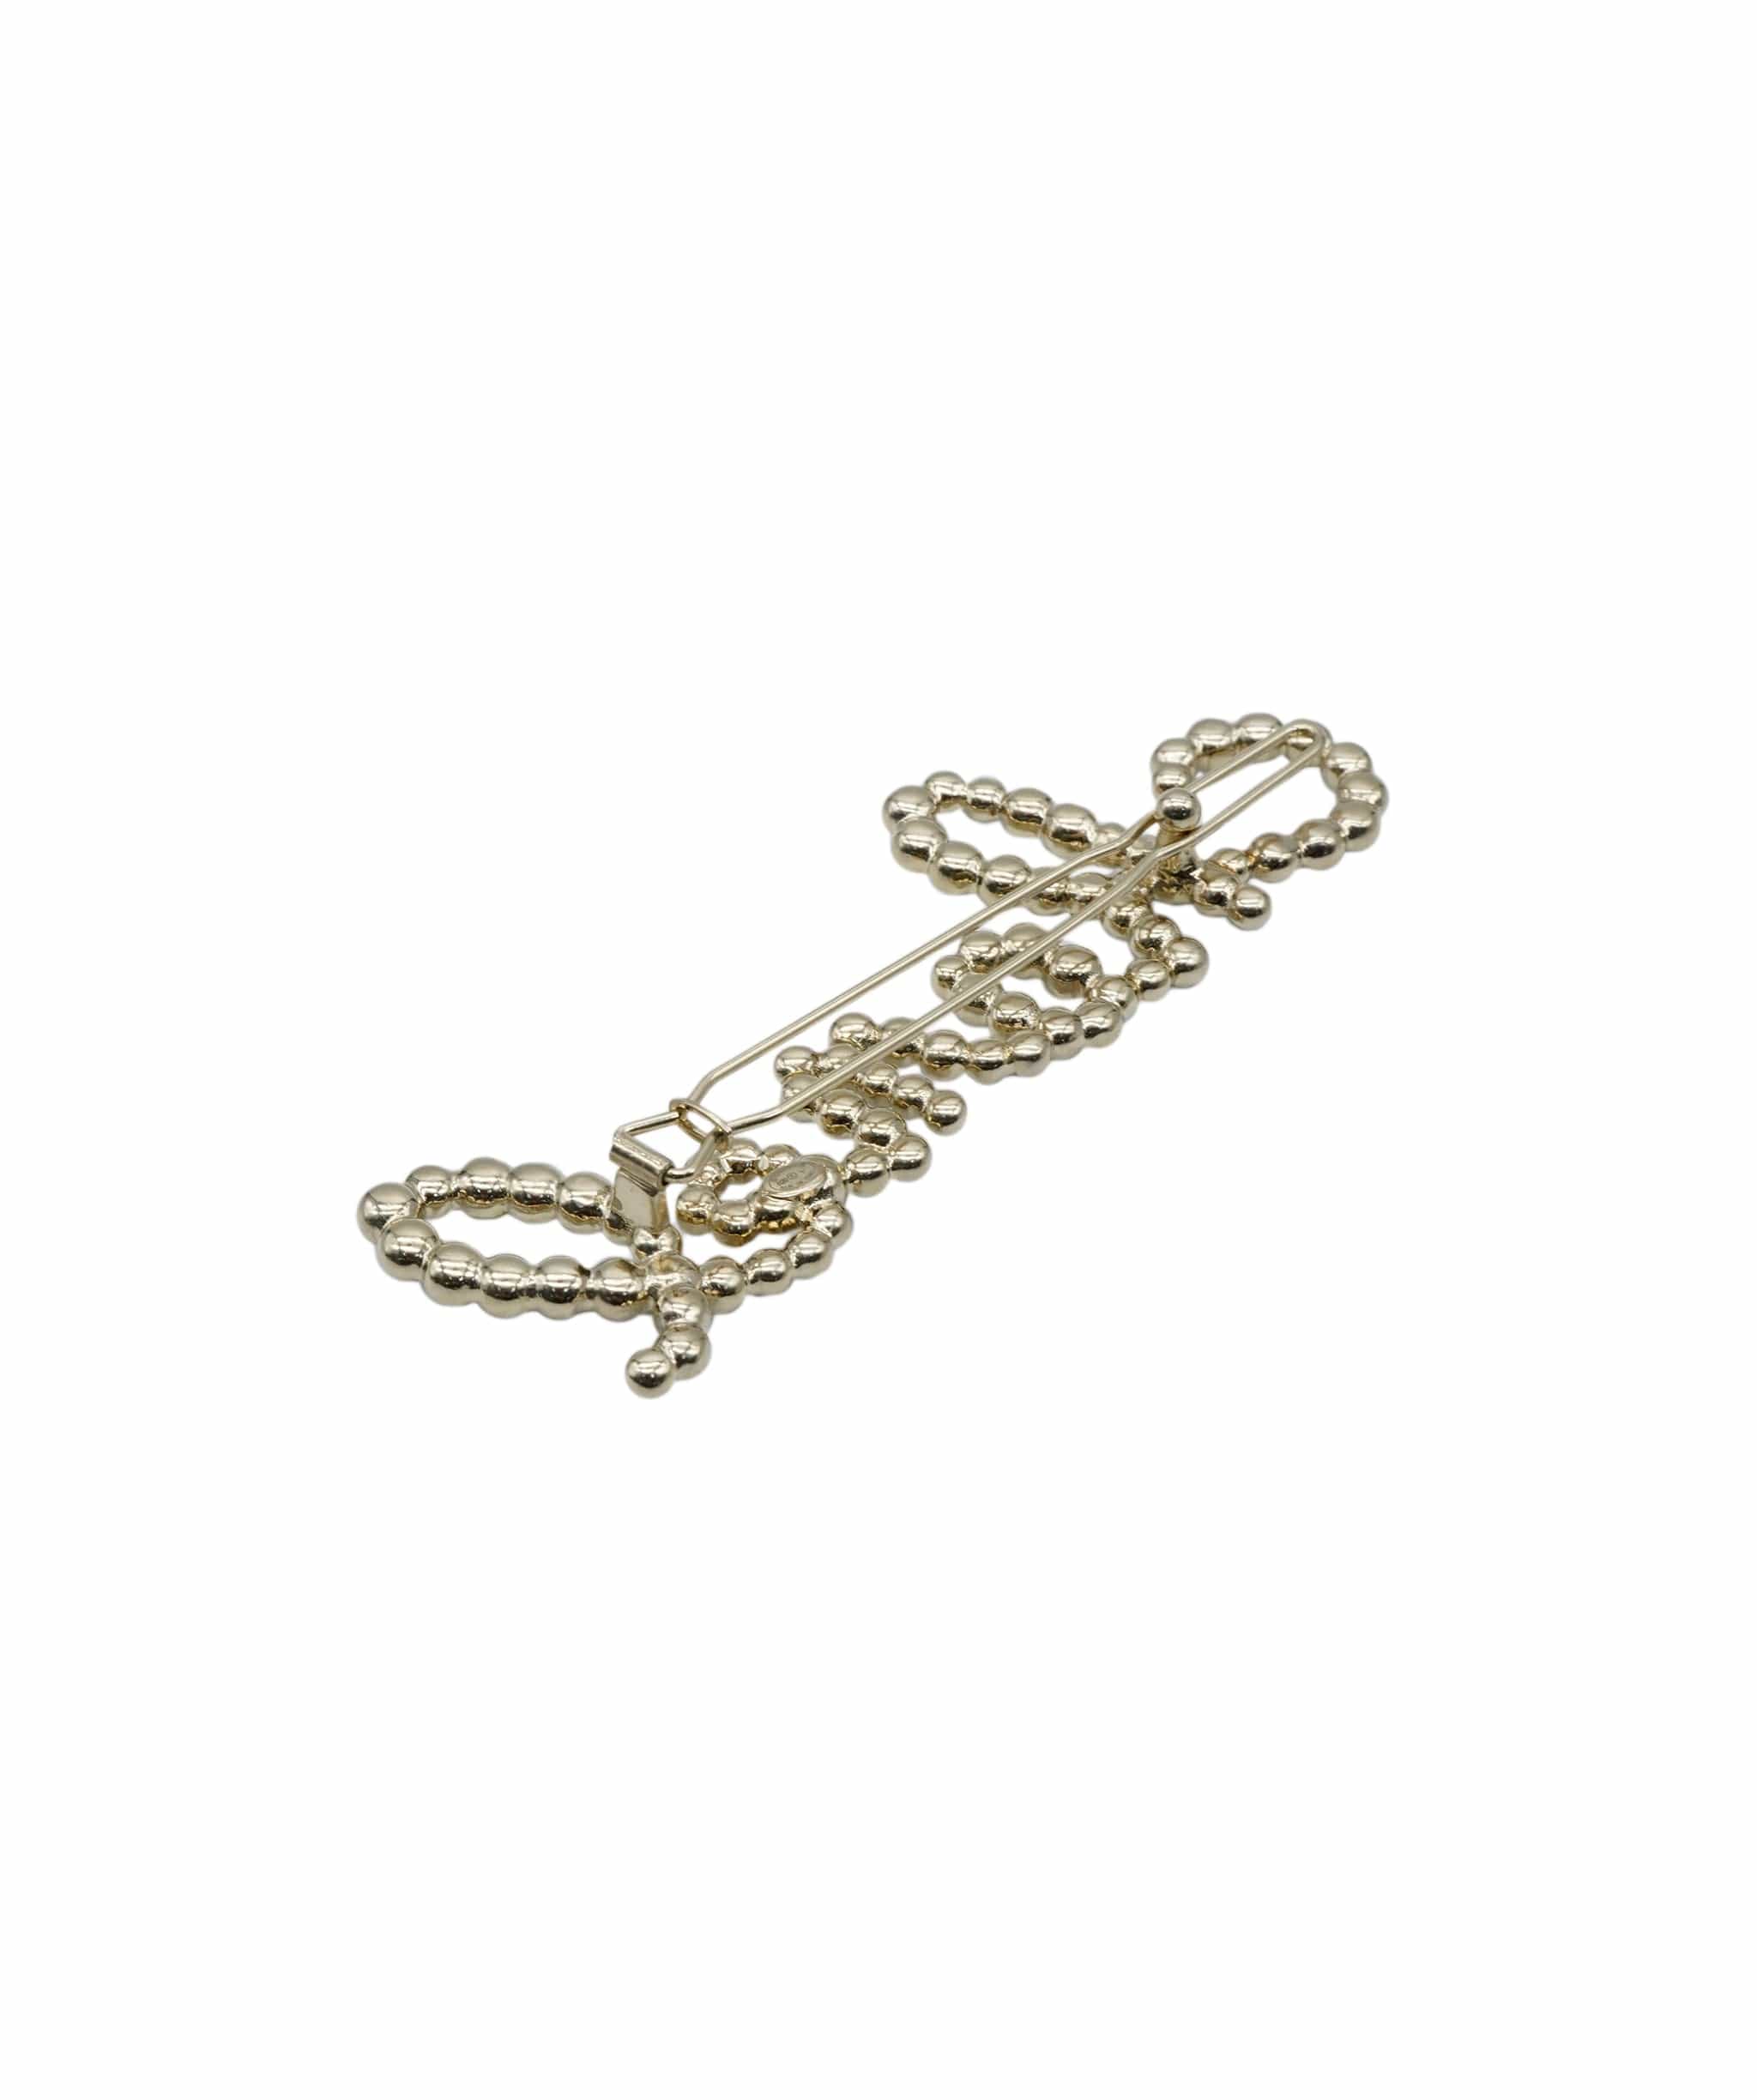 Chanel Chanel Pearl and Gold Hair Clip AEC12090-FD